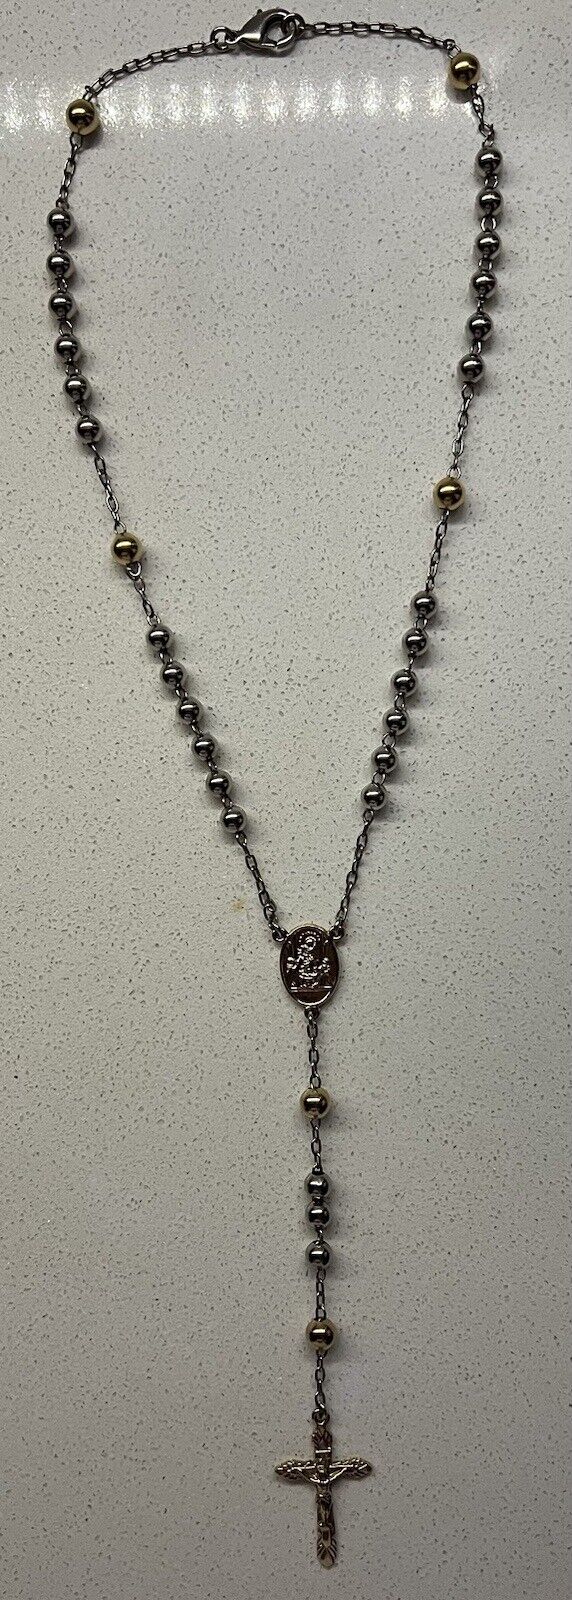 Dolce & Gabbana Gold Rosary Necklace